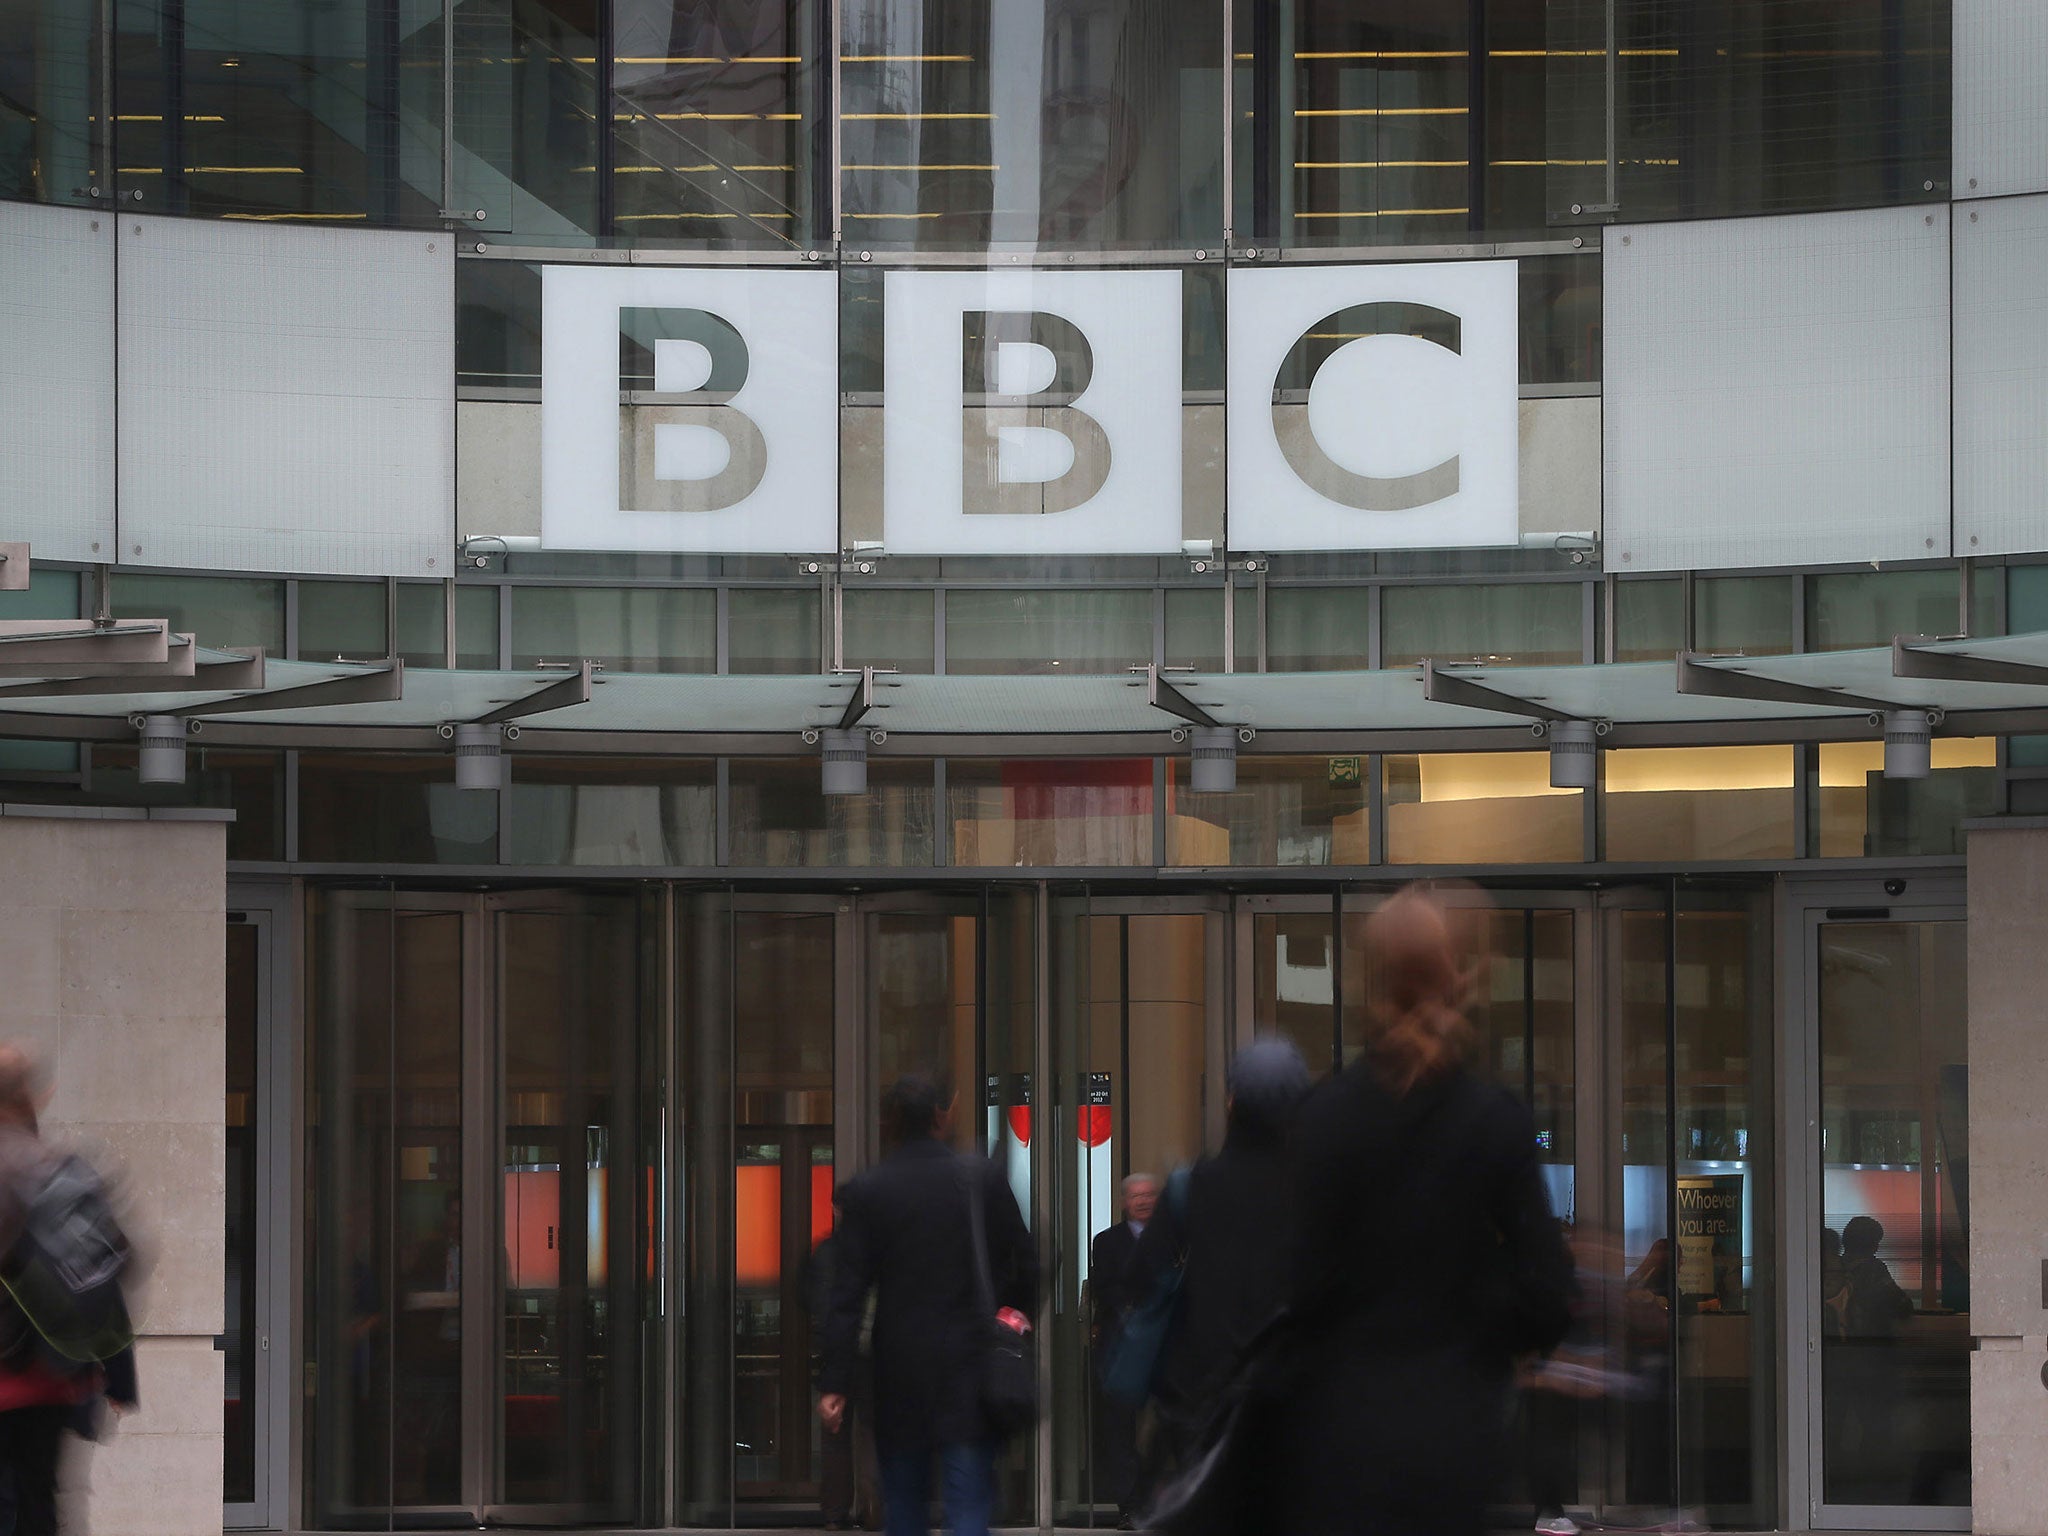 The present round of wrangling over the BBC’s charter renewal has mostly gone the BBC’s way